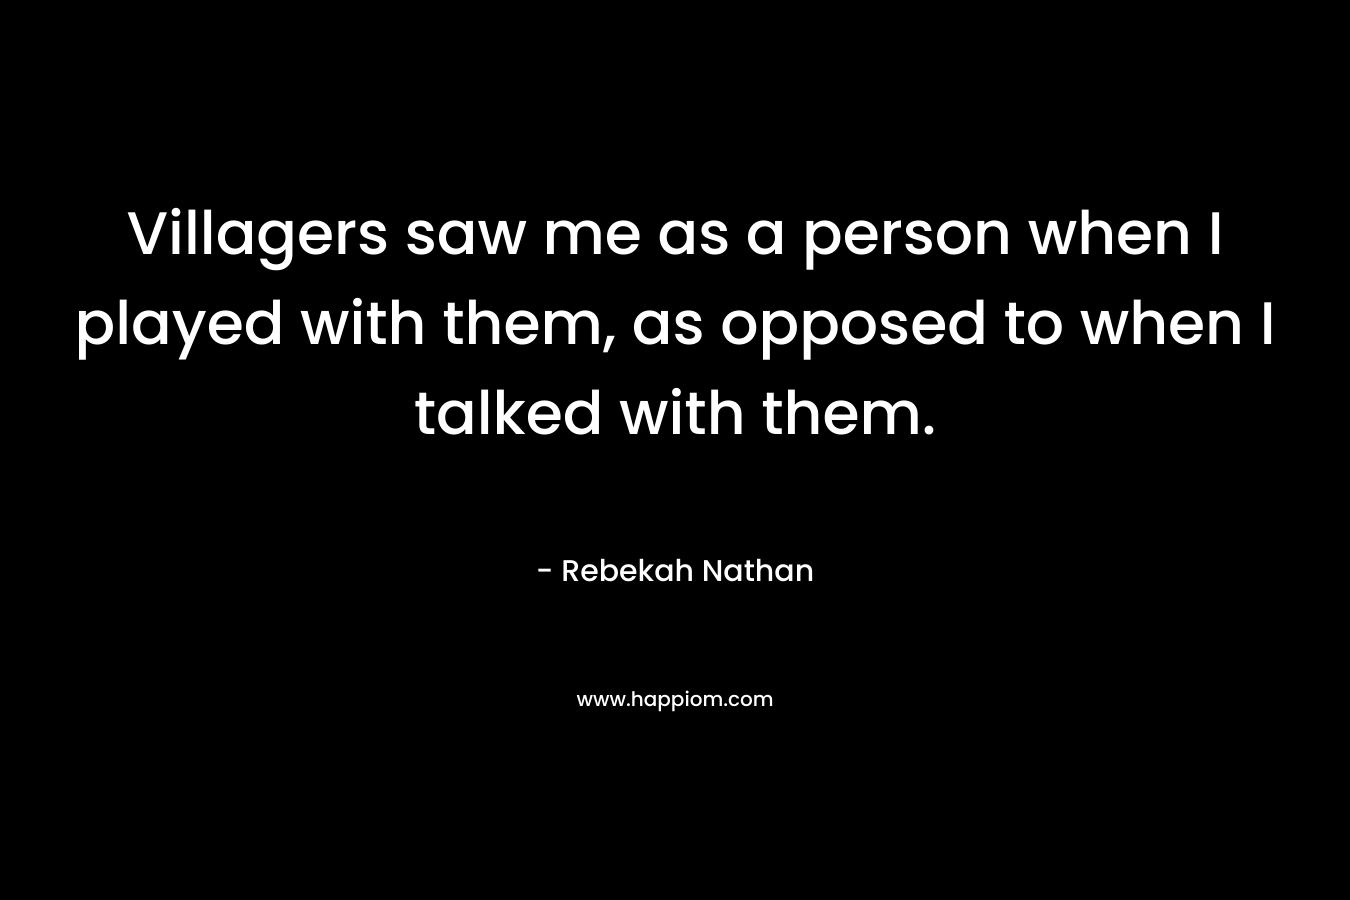 Villagers saw me as a person when I played with them, as opposed to when I talked with them. – Rebekah Nathan